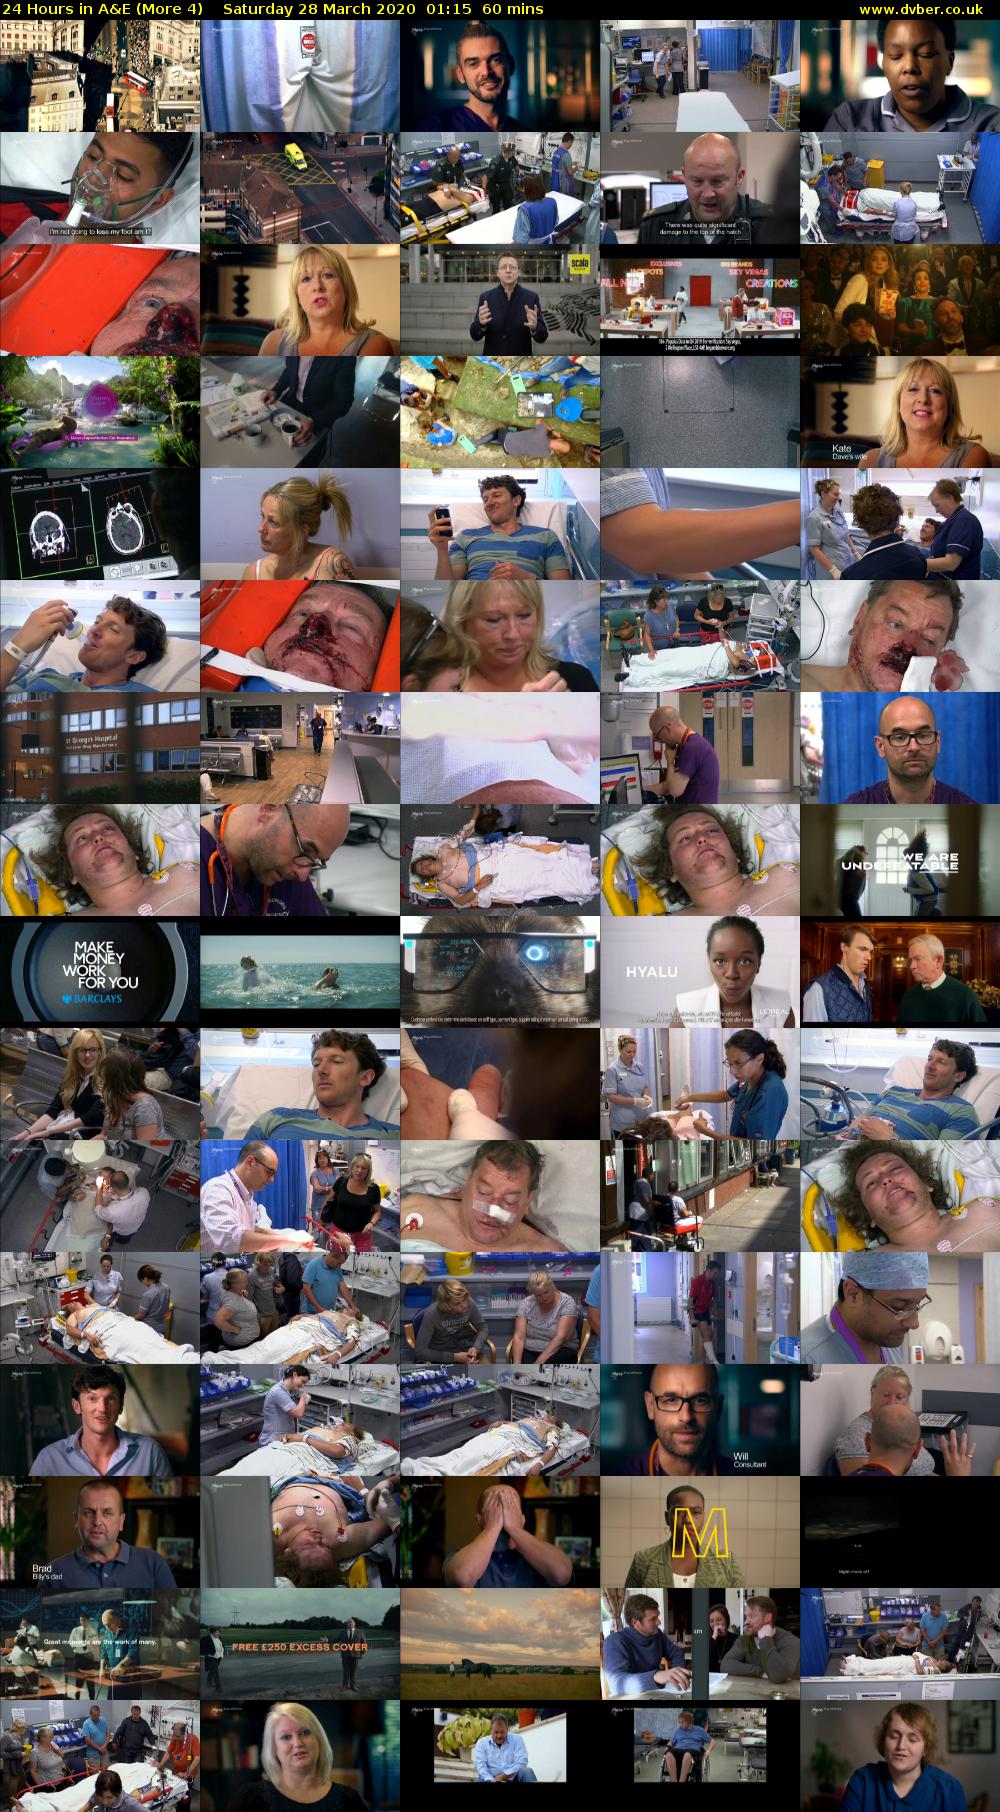 24 Hours in A&E (More 4) Saturday 28 March 2020 01:15 - 02:15